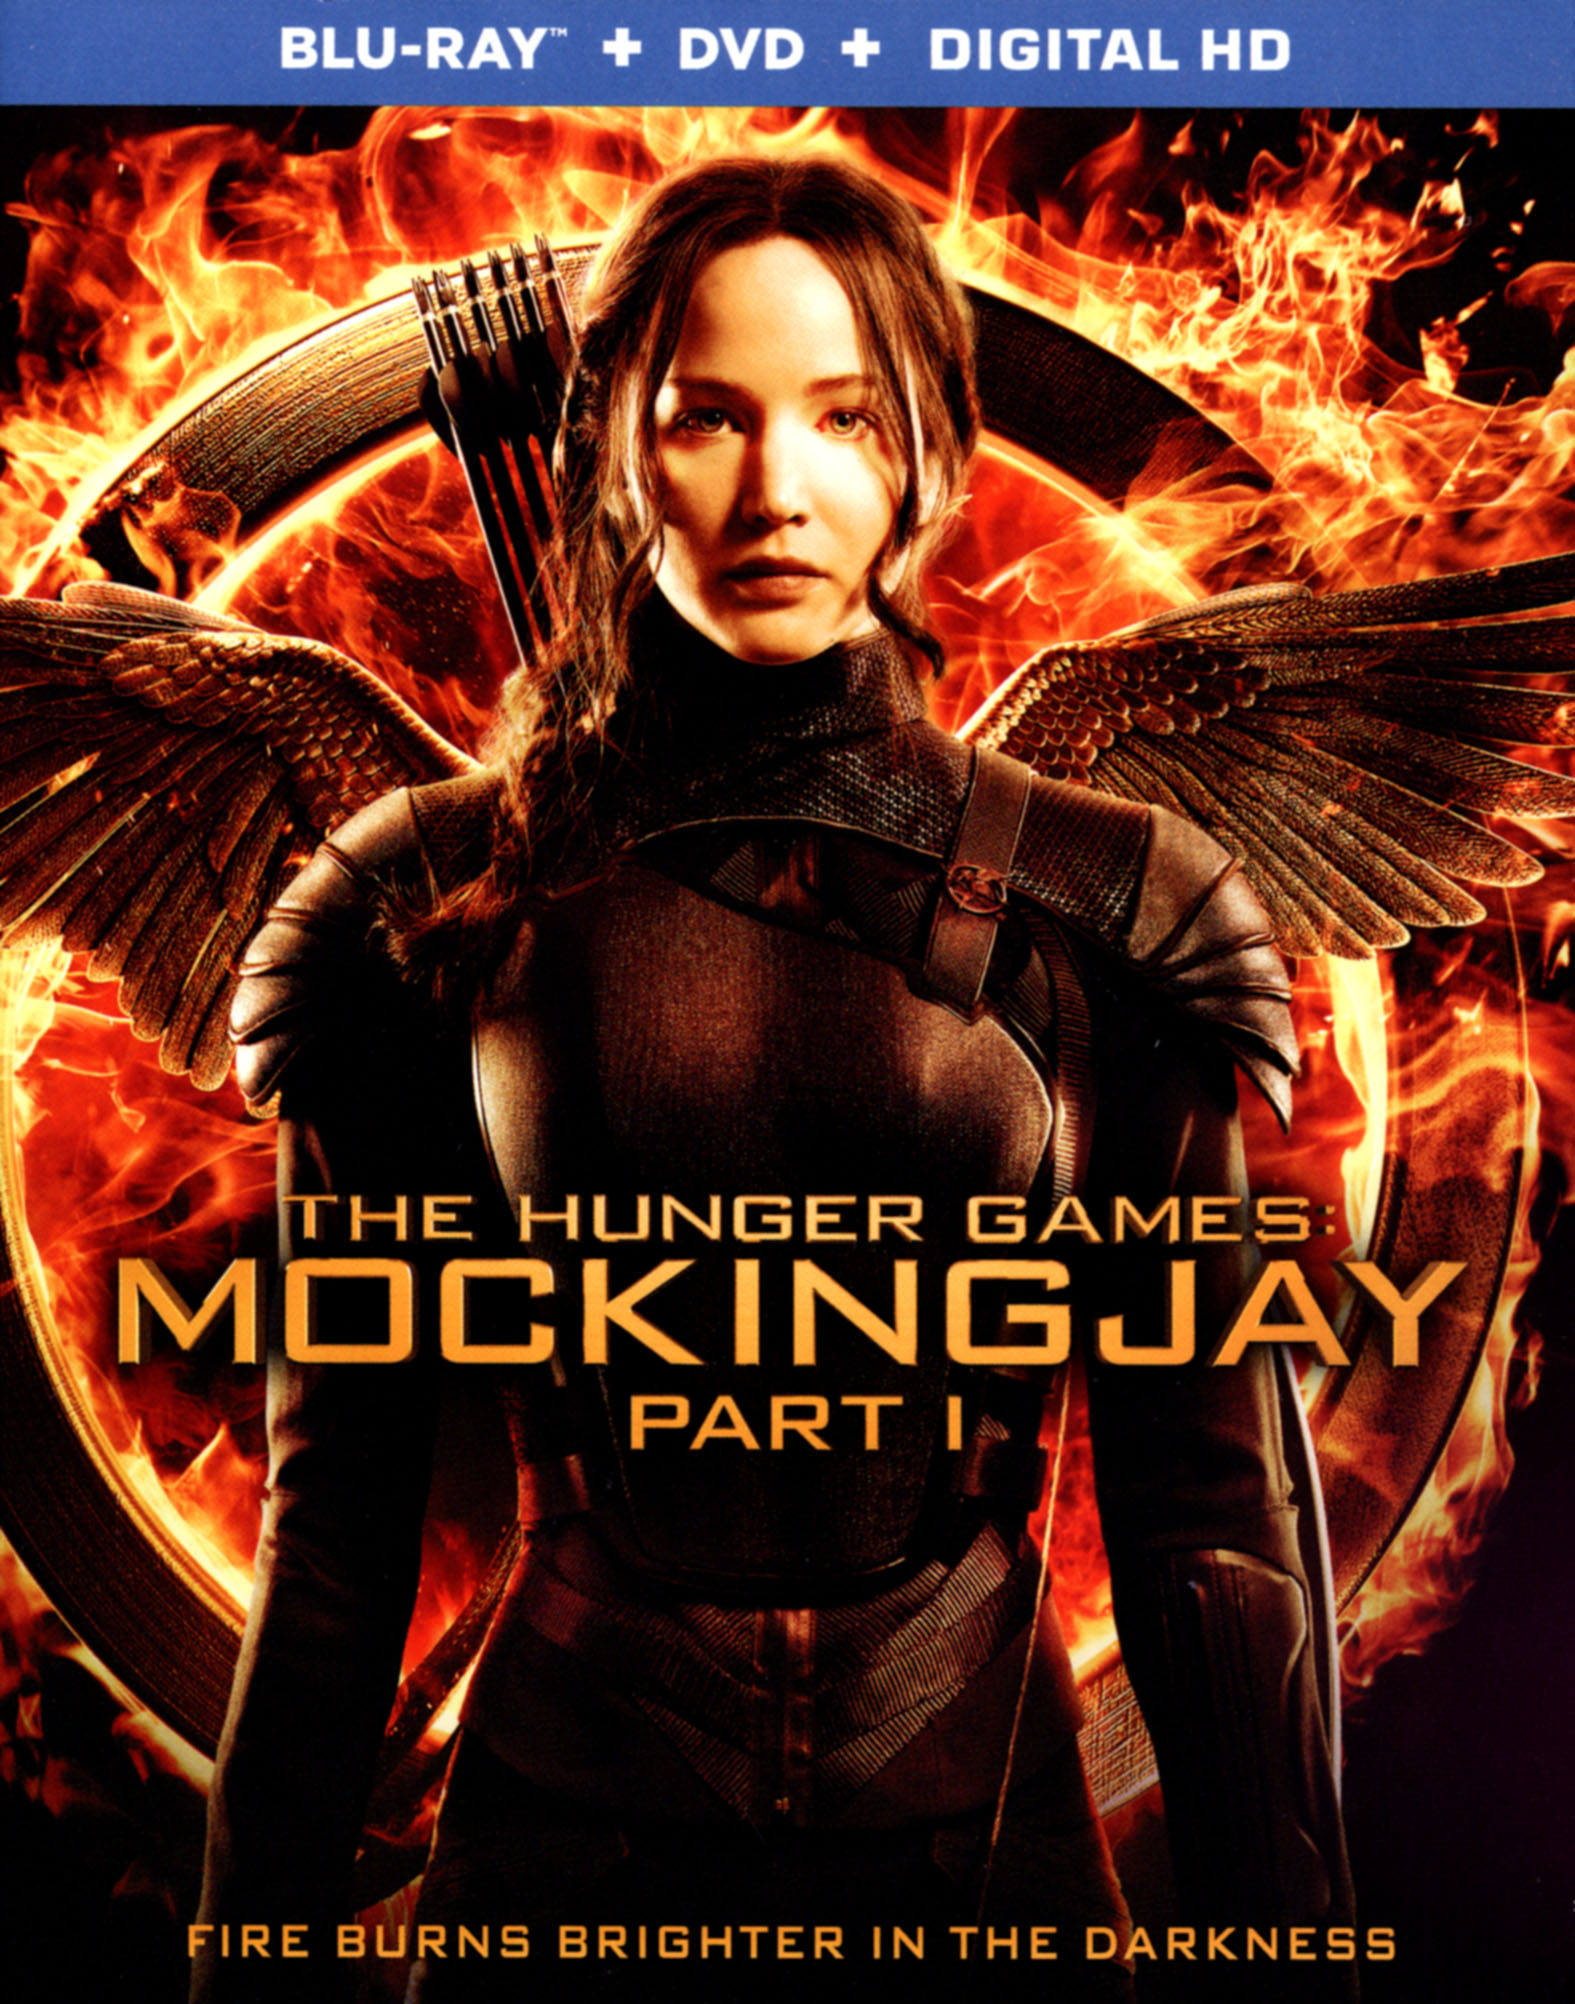 The Hunger Games Mockingjay Part 1 2 Discs Include Digital Copy Blu Raydvd 2014 